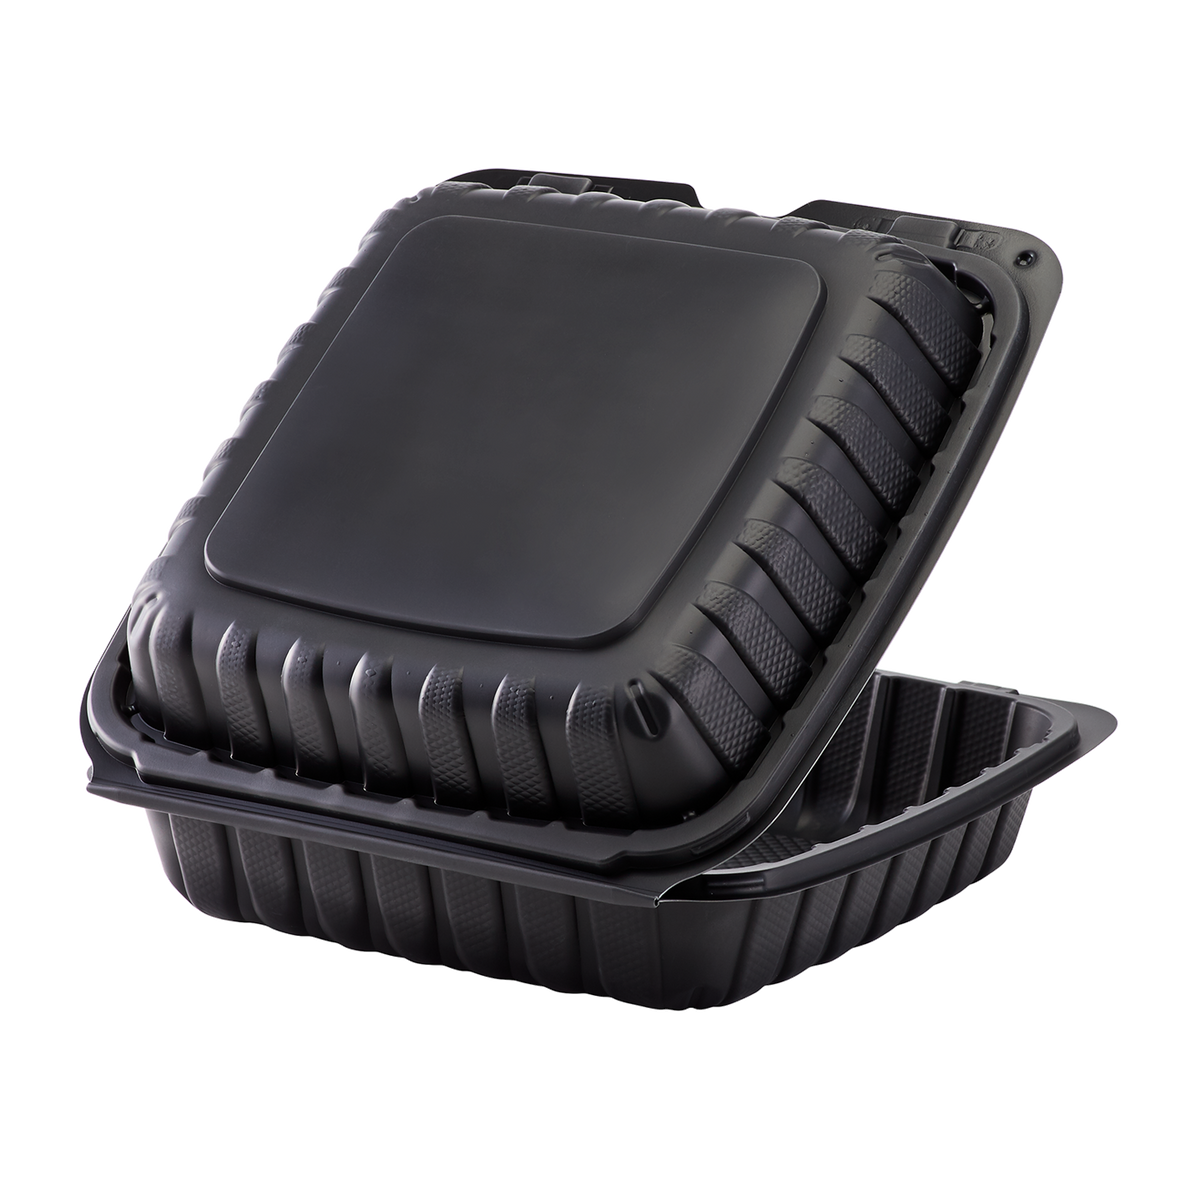 Avant Grub Durable 6x9 Take Out Food Containers with Clamshell Hinged Lid  100 Pack. Microwaveable, Disposable Takeout Box to Carry Meals ToGo. Great